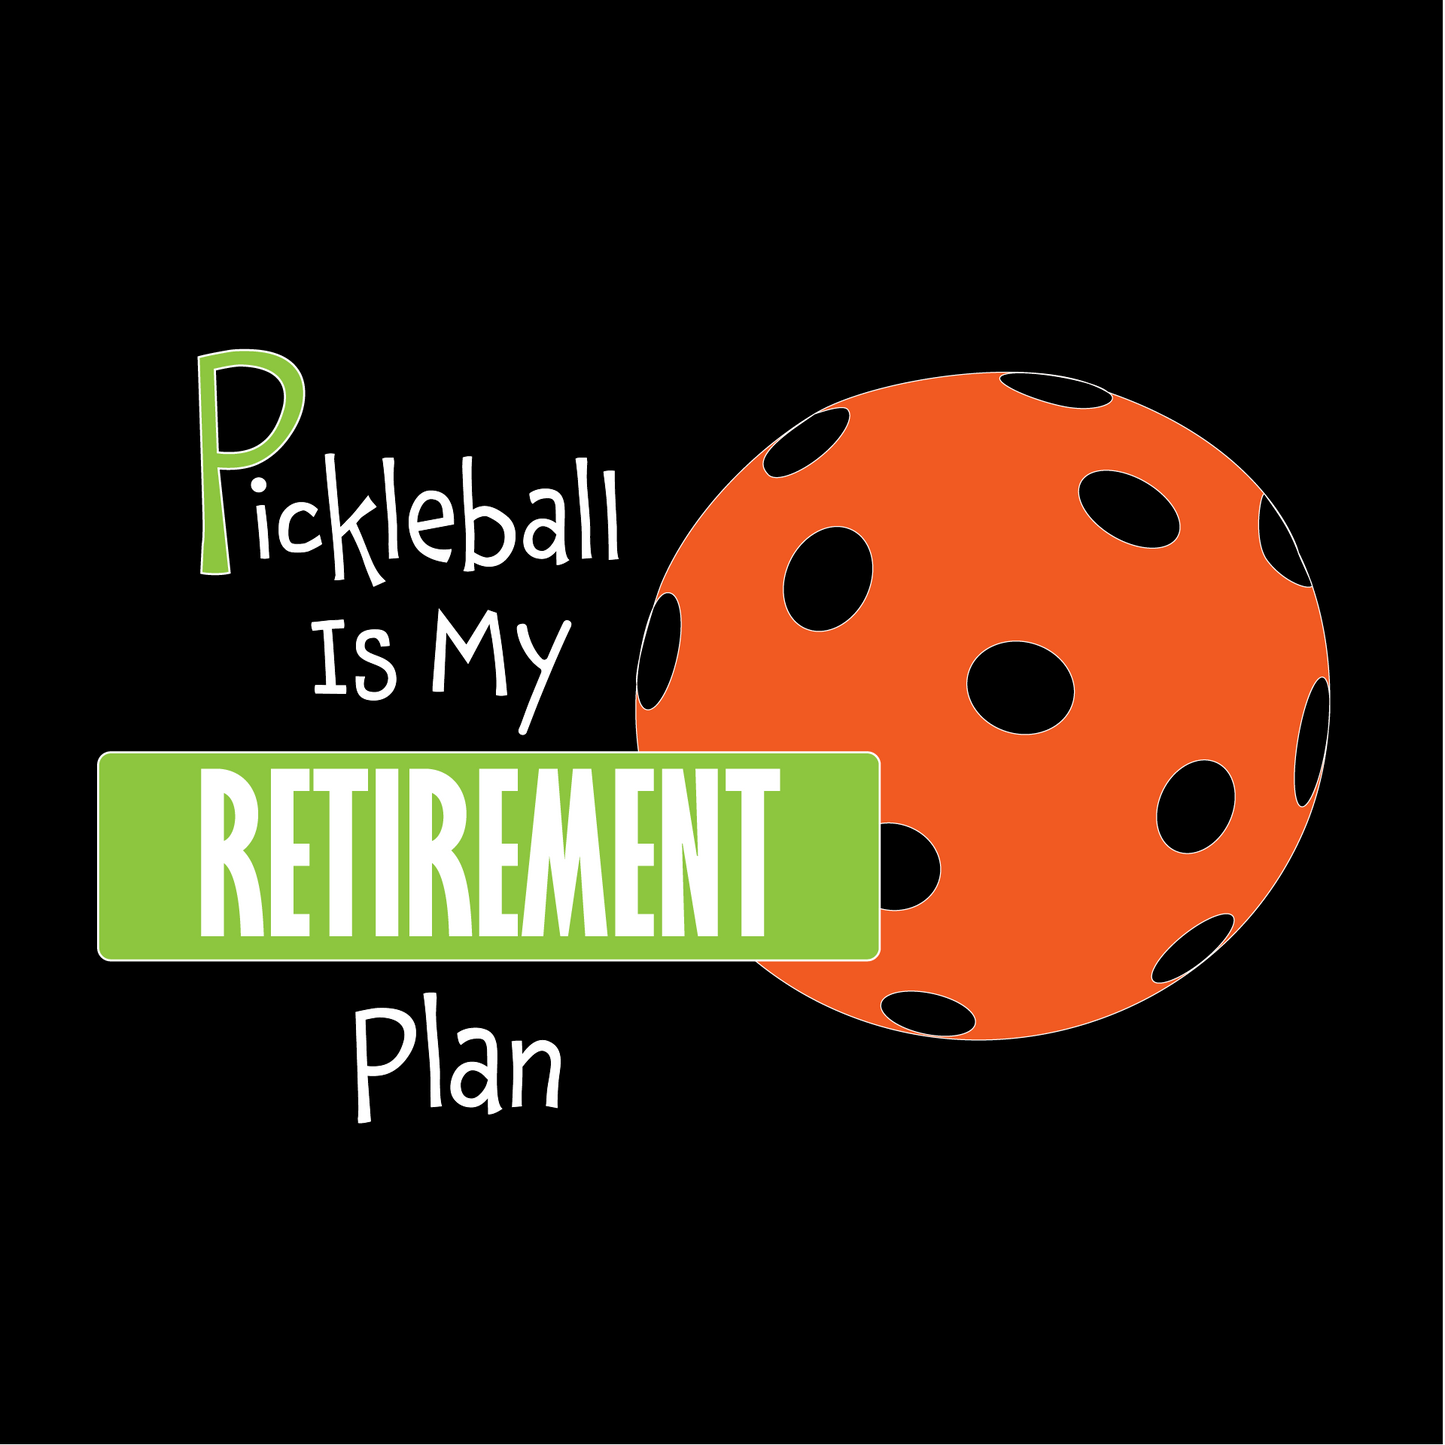 Pickleball Is My Retirement Plan | Women's 1/4 Zip Pullover Athletic Shirt | 100% Polyester